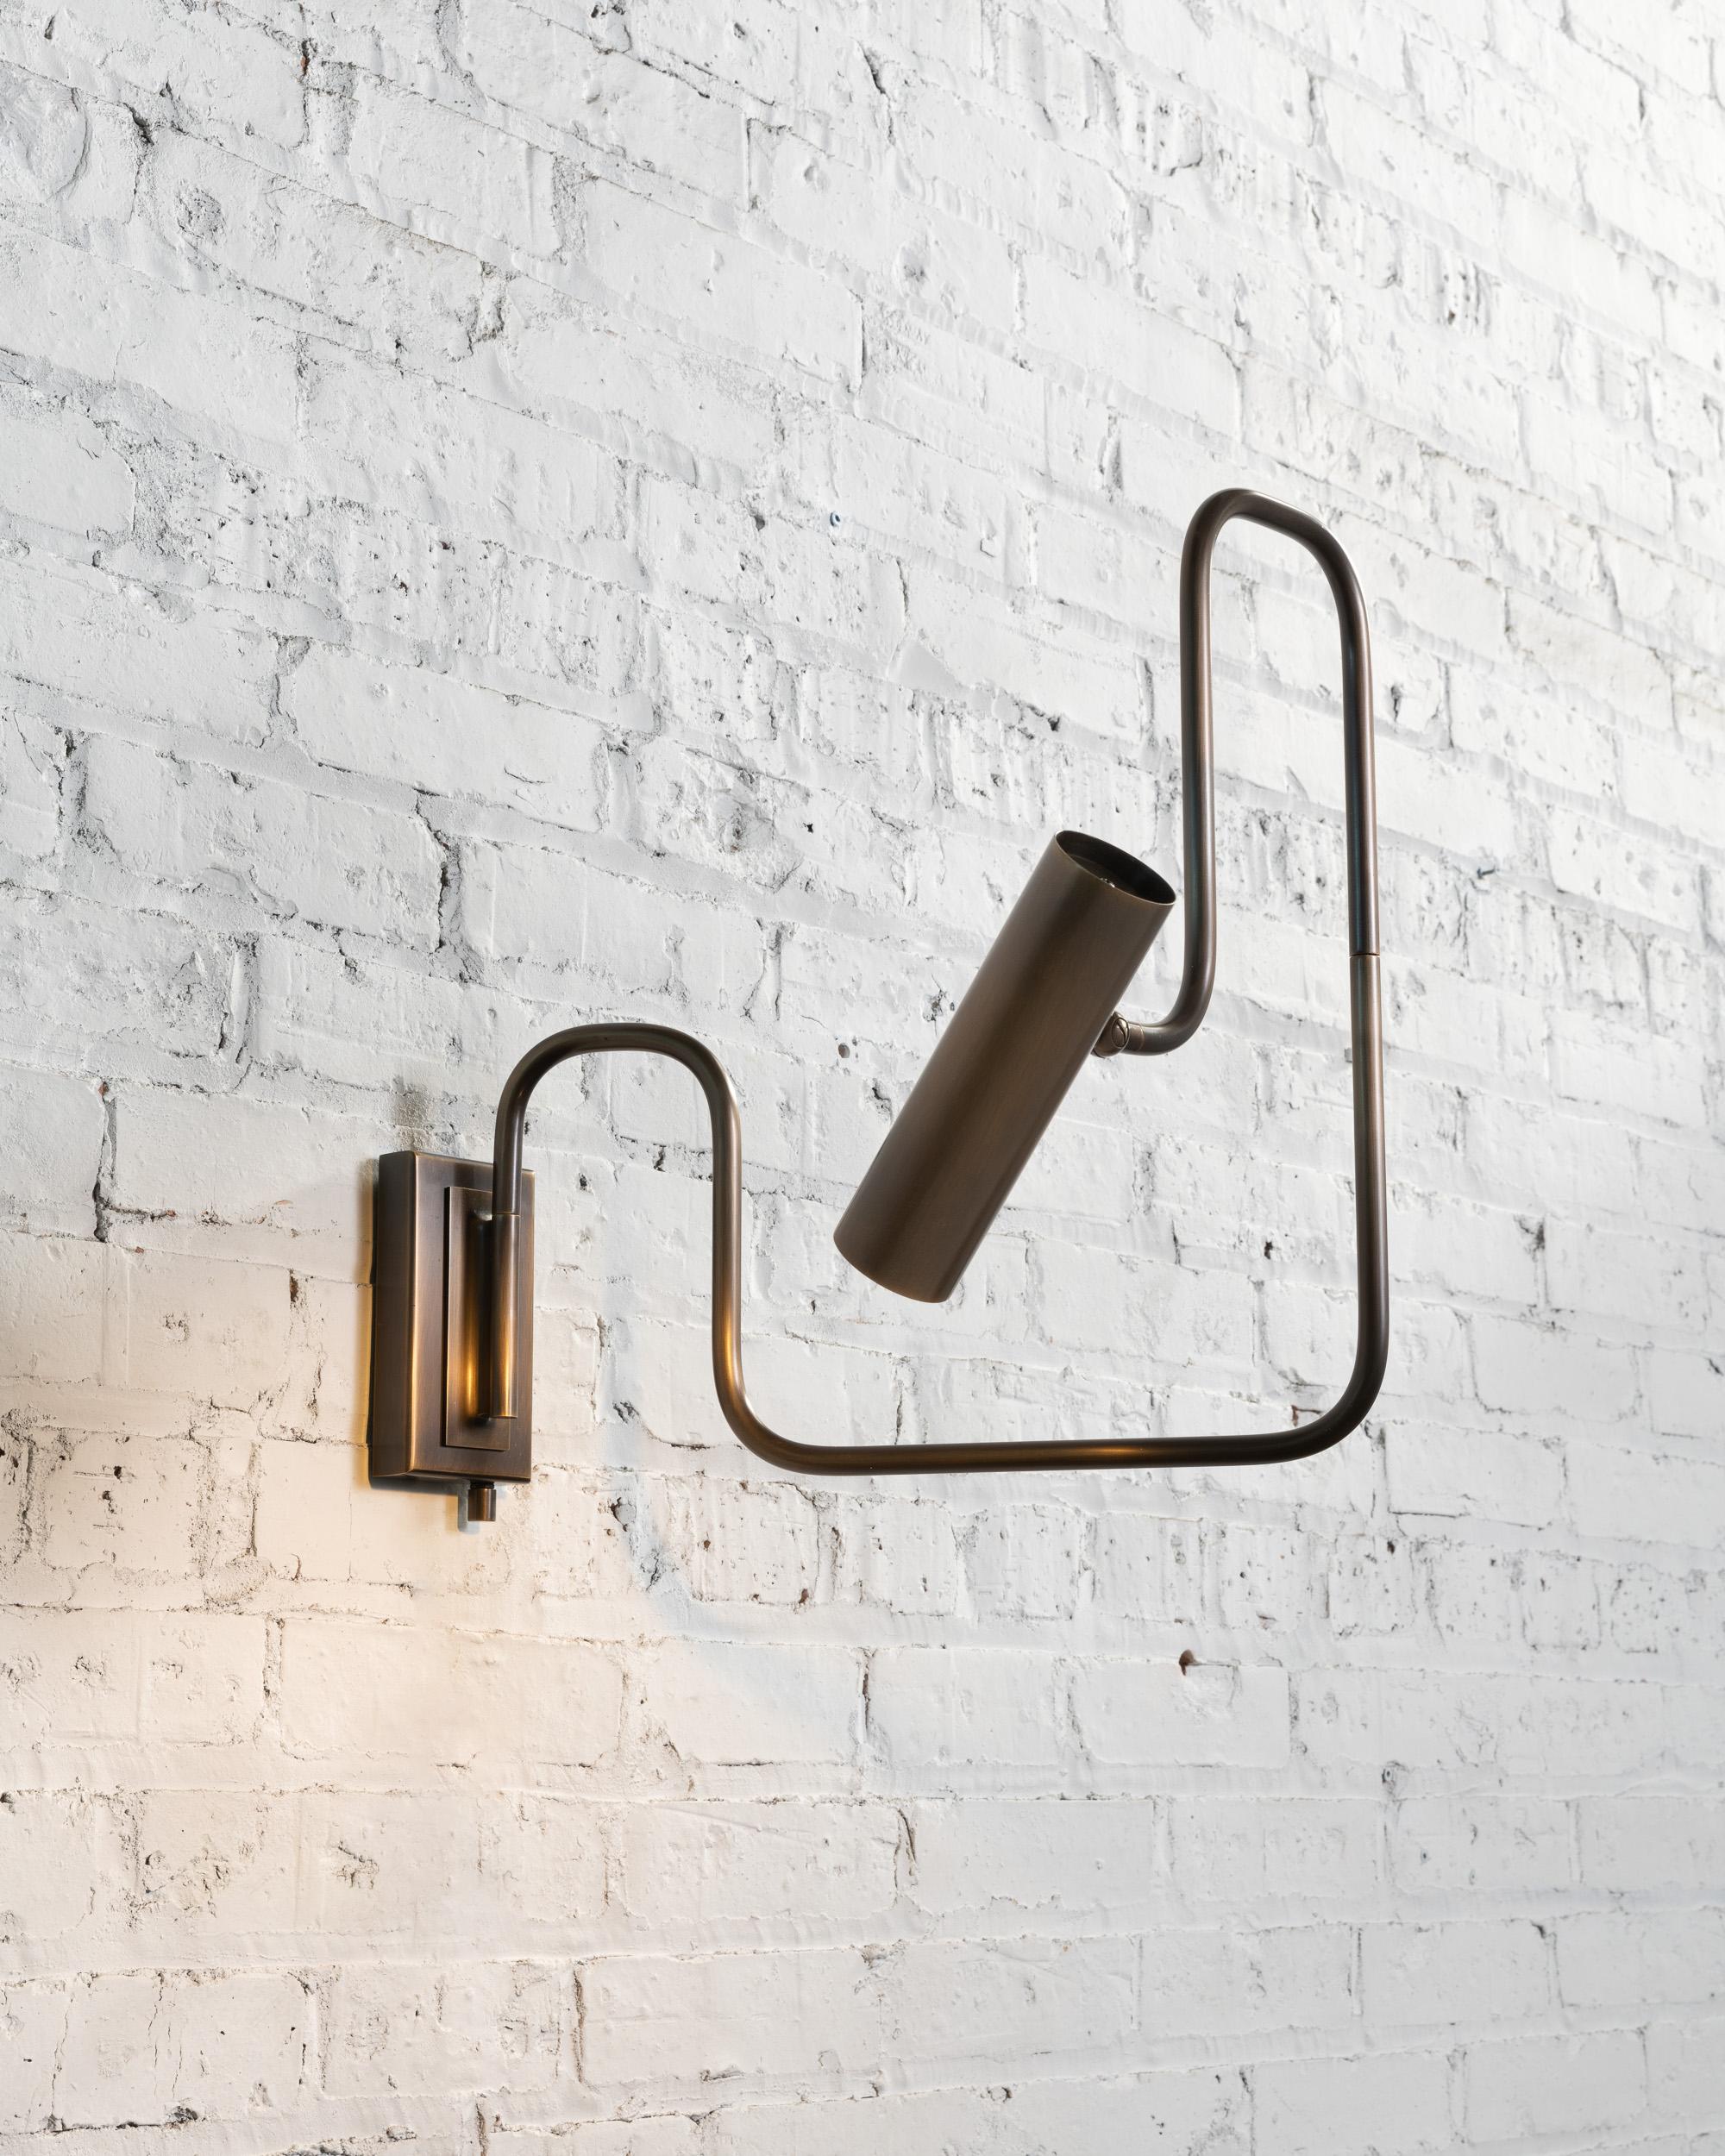 The Pivot LED series with its articulated arm and adjustable head this brass lamp, is not only multidimensional, but it is an ever changing line drawing that nestles into a room. Reminiscent of Industrial piping, the warmth of the refined material